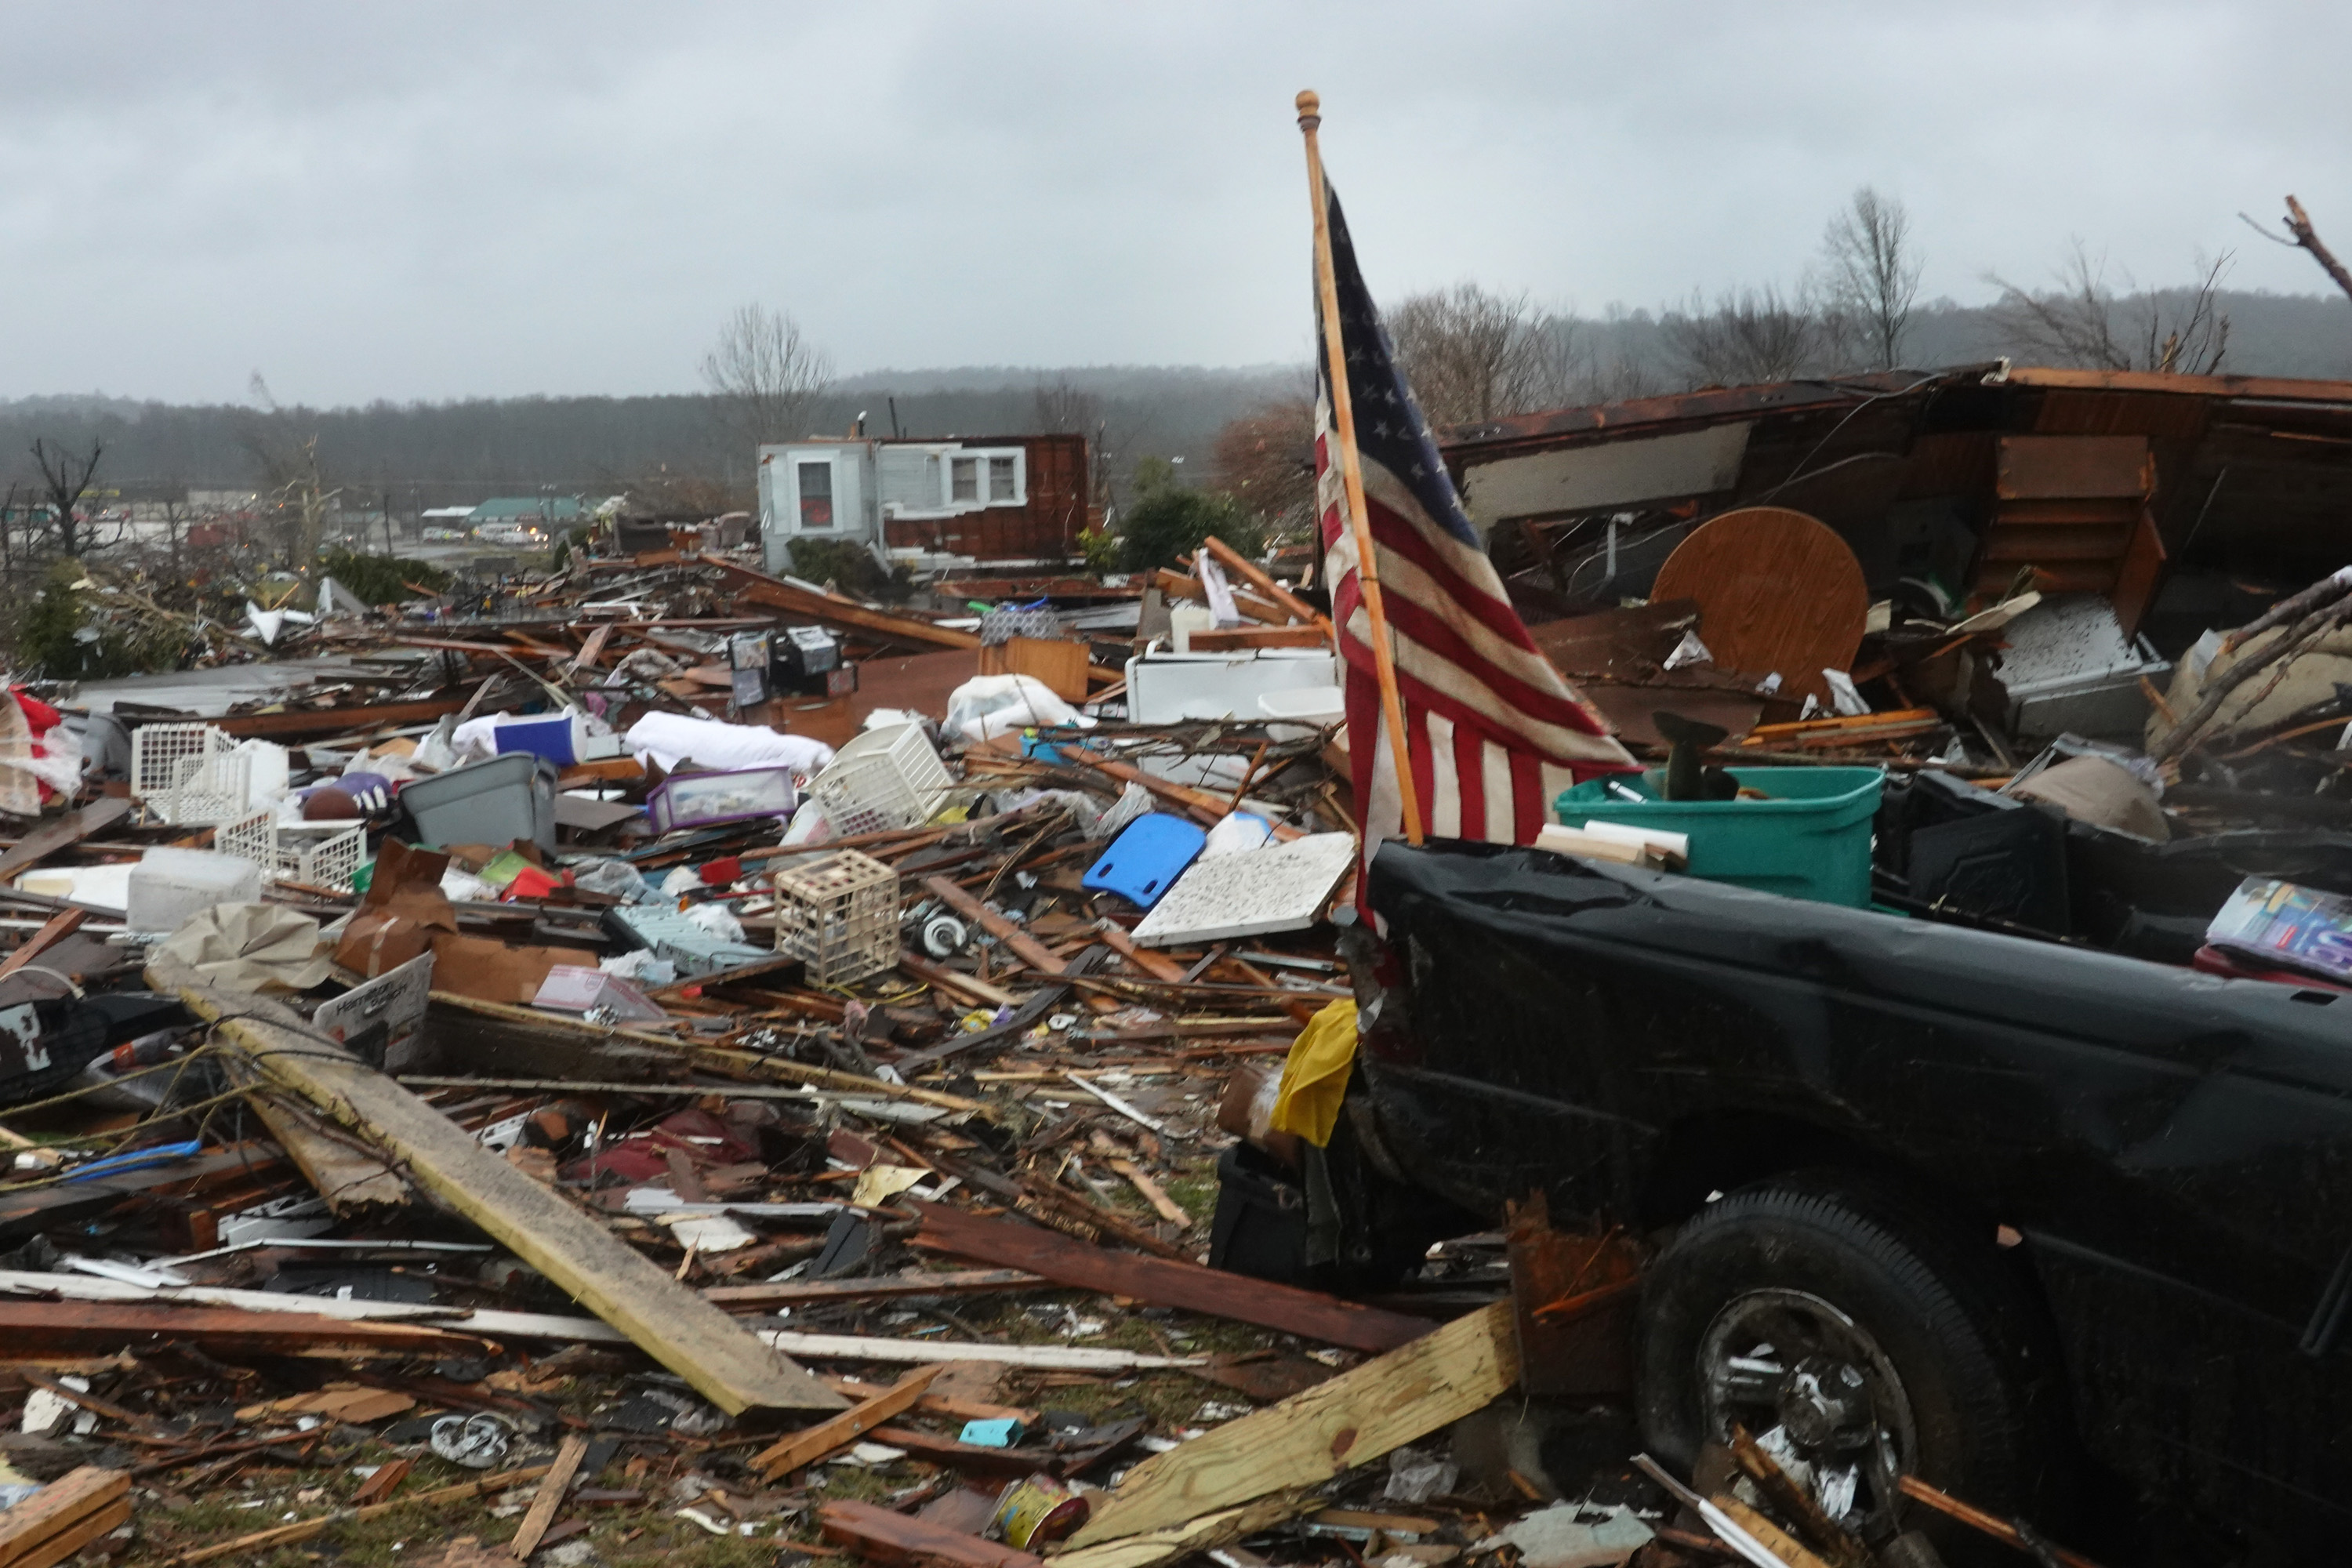 Homes destroyed during last week’s tornado continue to litter the landscape on Dec. 16 in Dawson Springs, Kentucky.